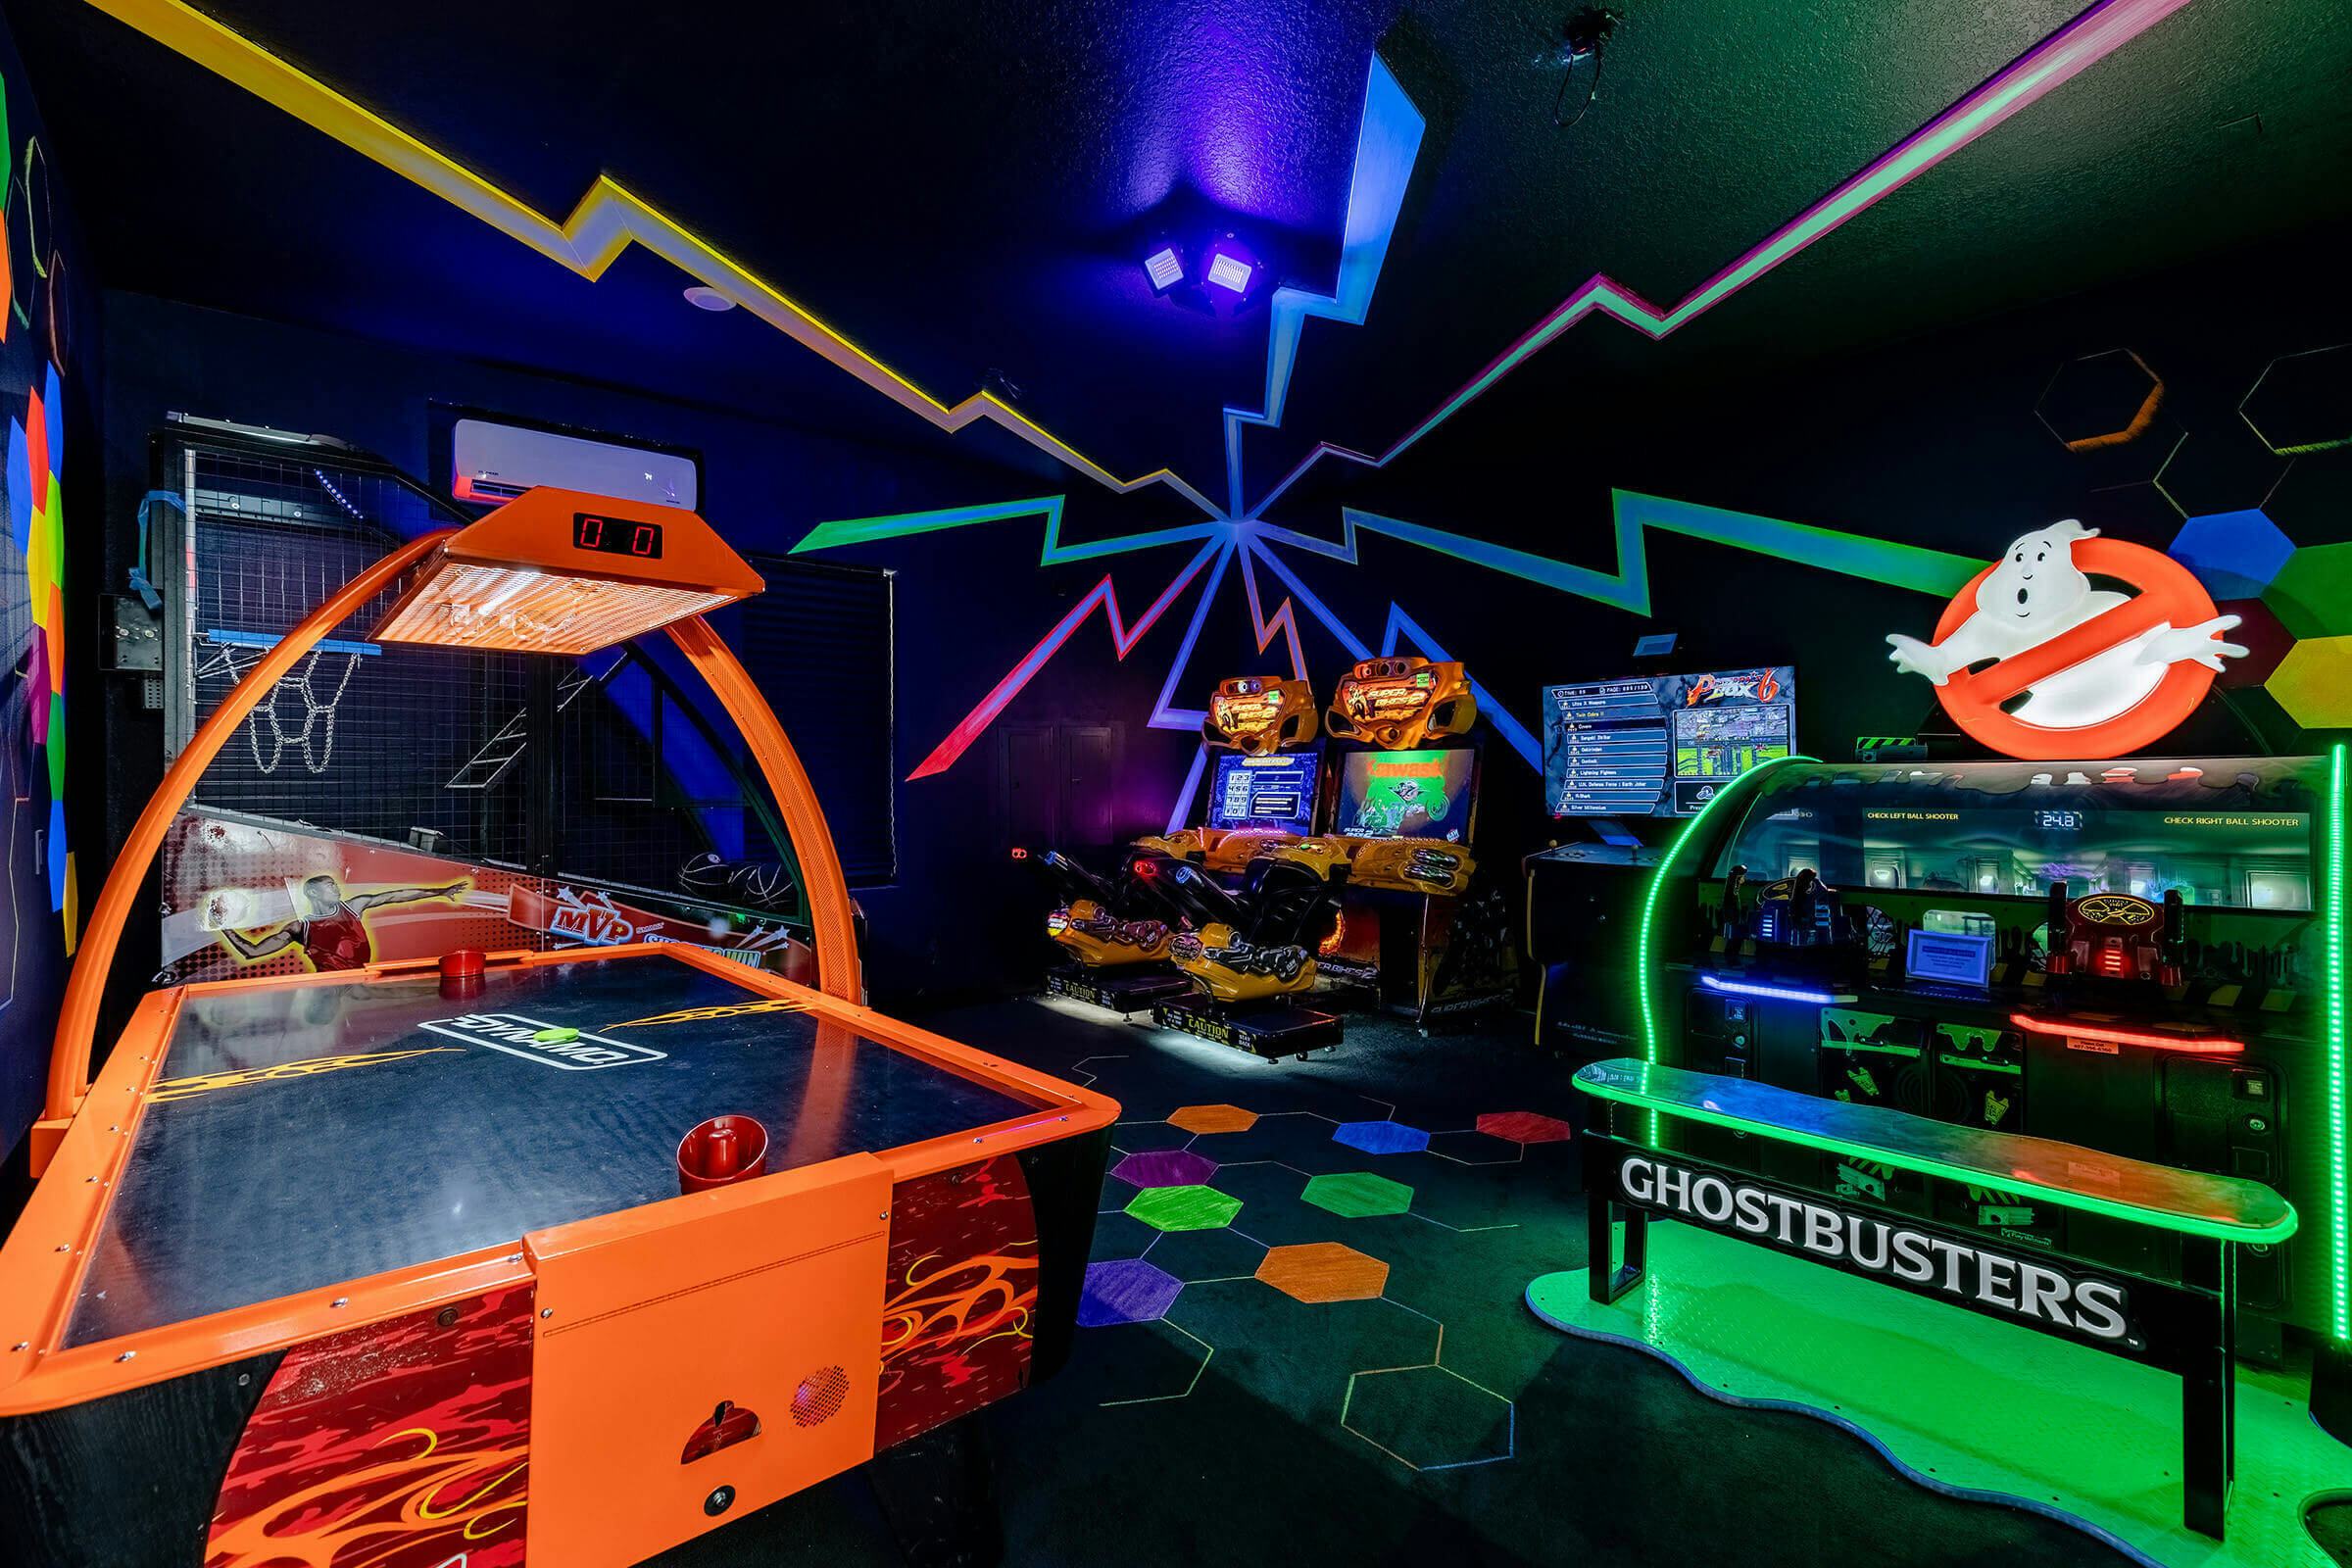 A fun neon coloured games room found within the home